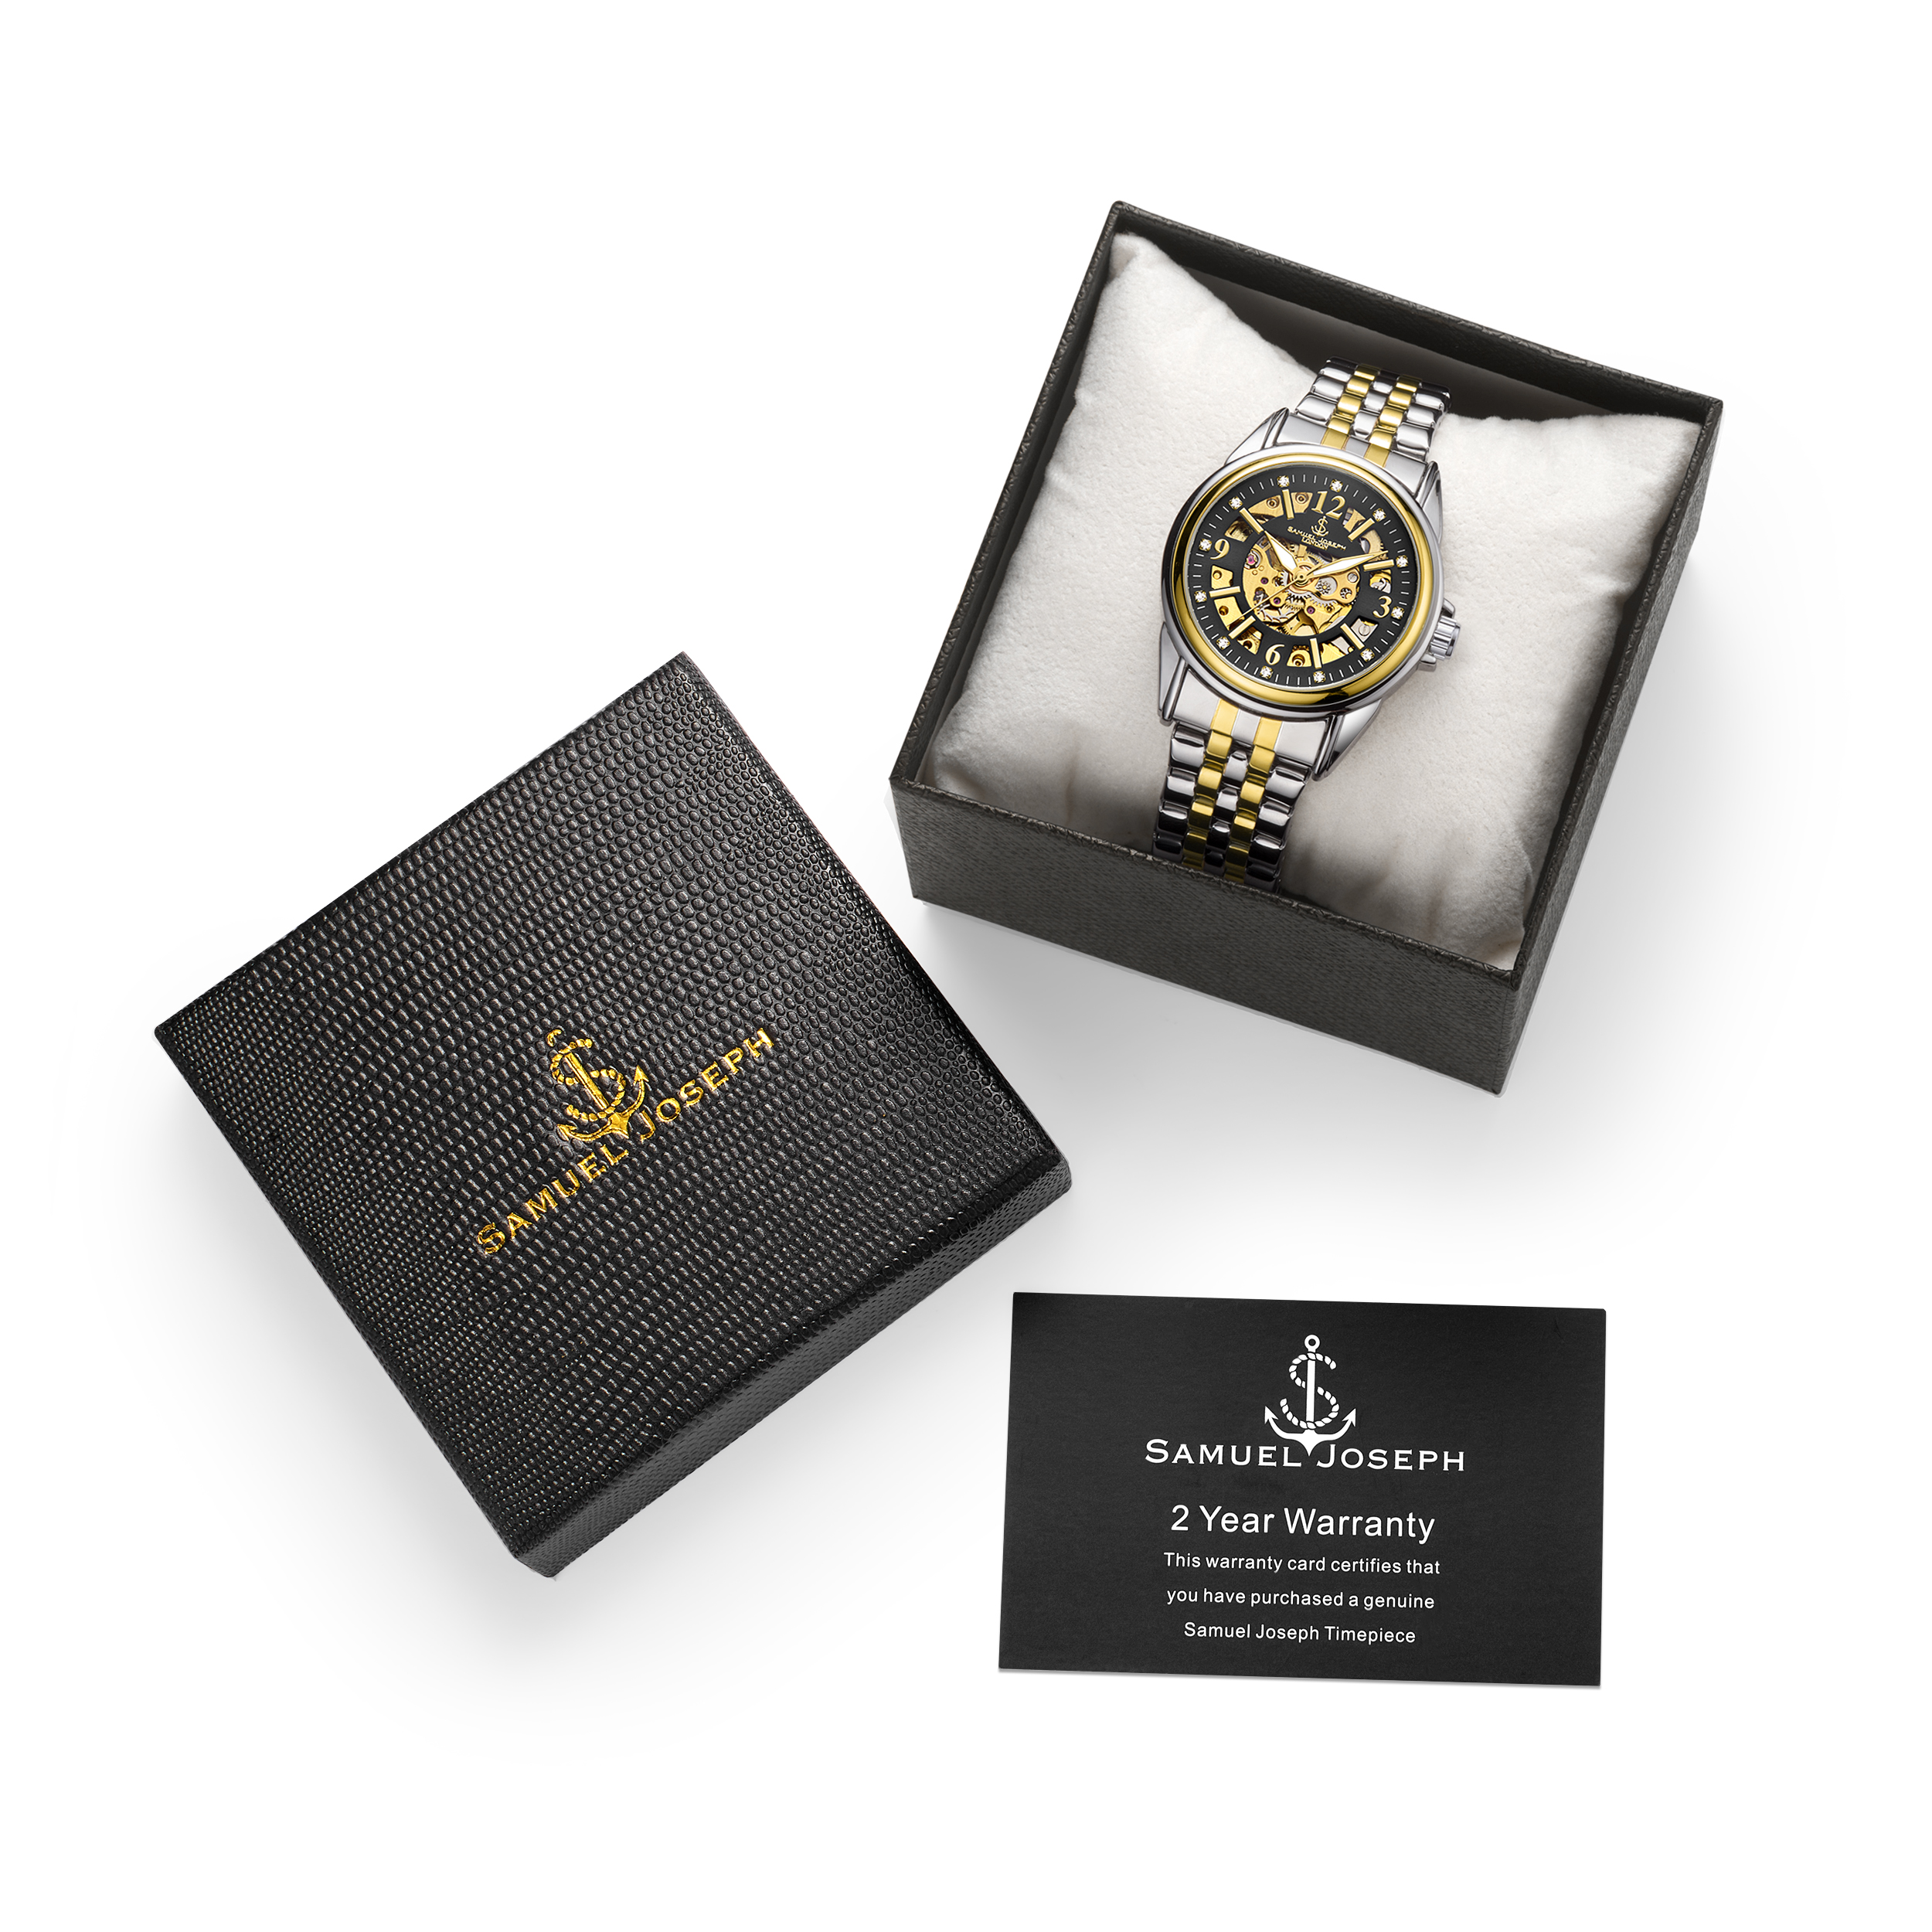 Samuel Joseph Limited Edition Skeleton Jubilee Two Tone Watch - Free Delivery & 2 Year Warranty - Image 5 of 5